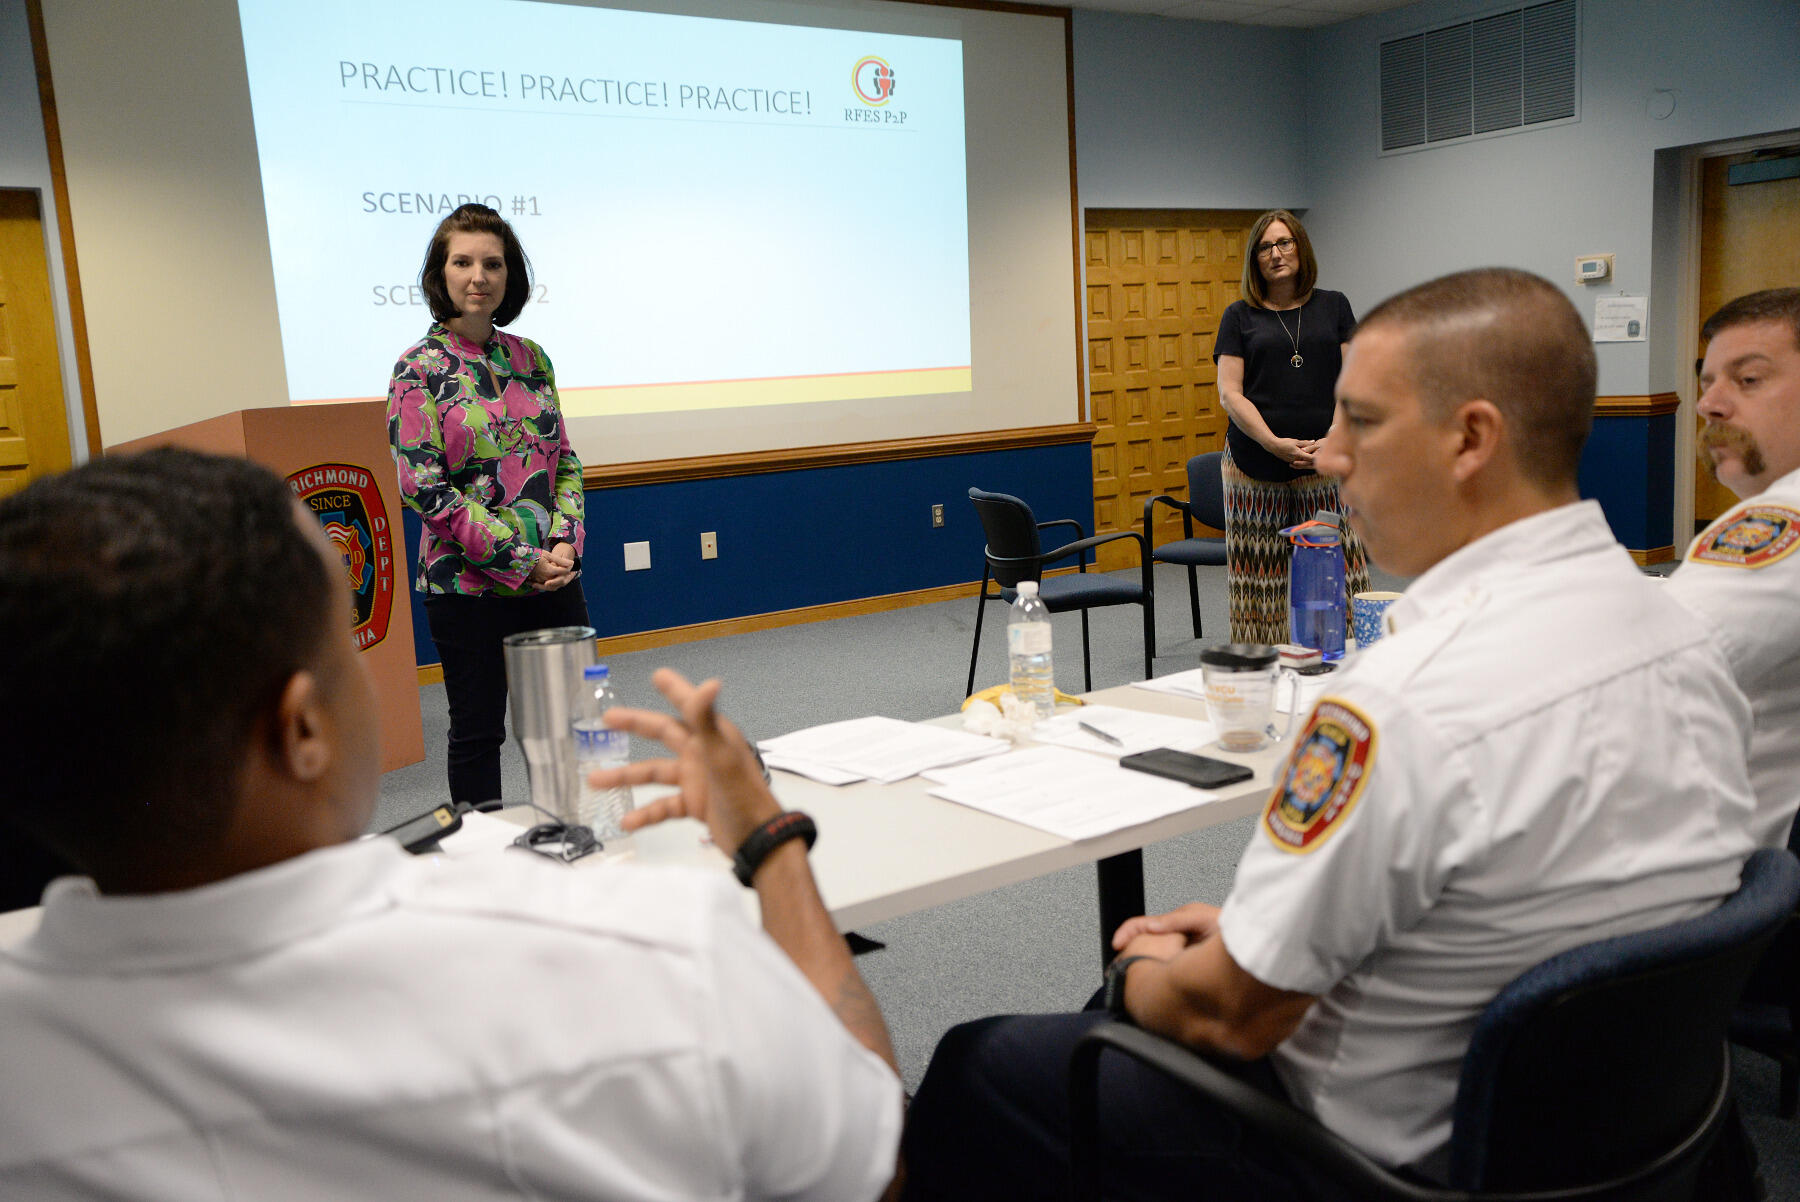 As part of the peer-support training, the firefighters learned how to conduct "motivational interviewing," a strategy for speaking with people about their problems that emphasizes making the space for others to work toward their own solutions.